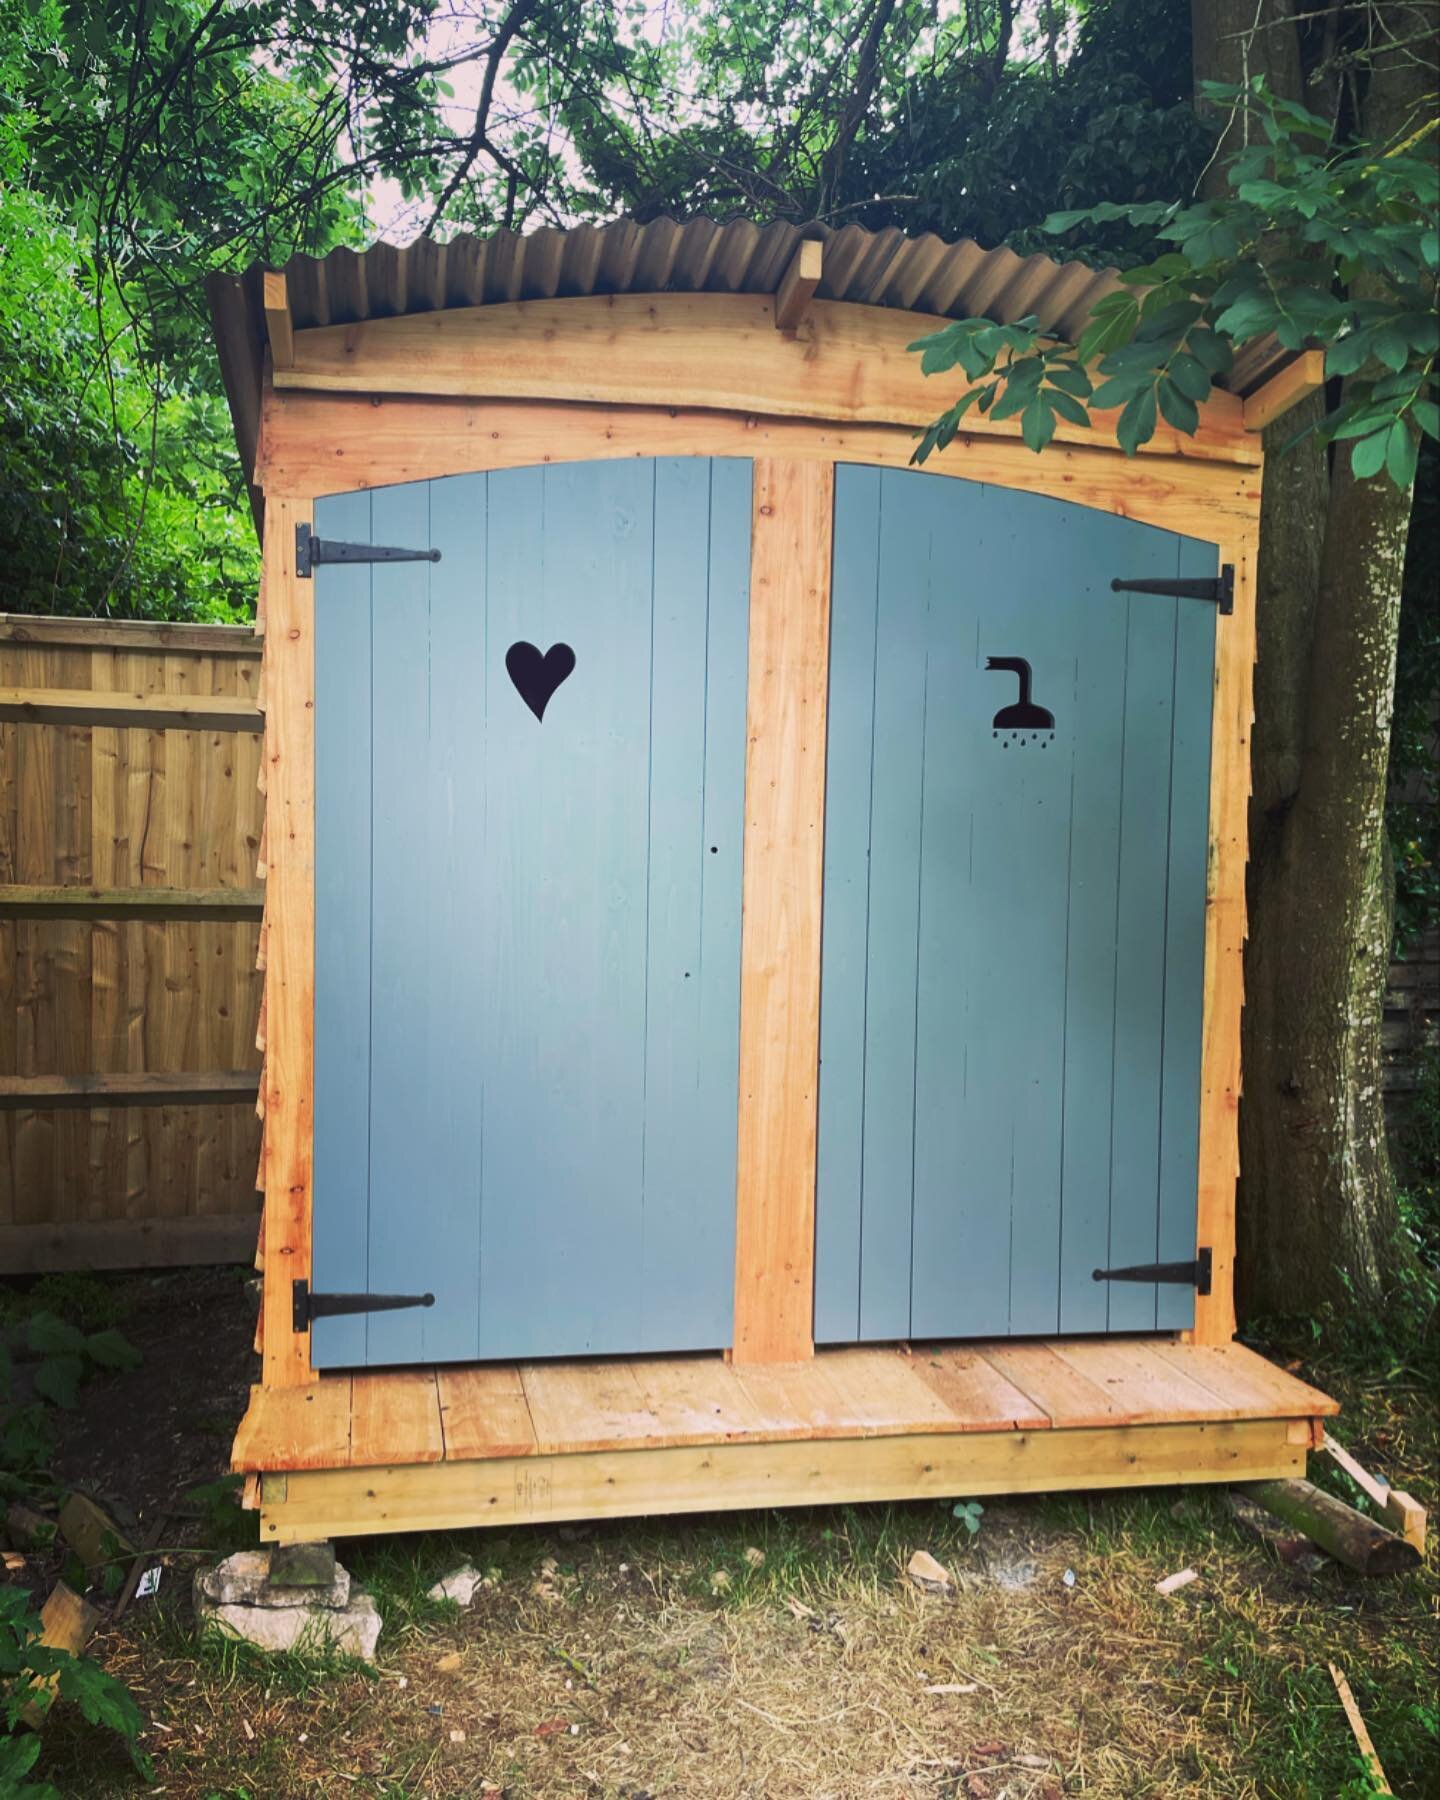 New #glampingtoilets for your #glampingsite Here one with a built in #compostingtoilet Get in touch for prices, tailoring and ordering. We make everything #bespoke from locally sourced timber and to order. #nordicstyle #carpentry